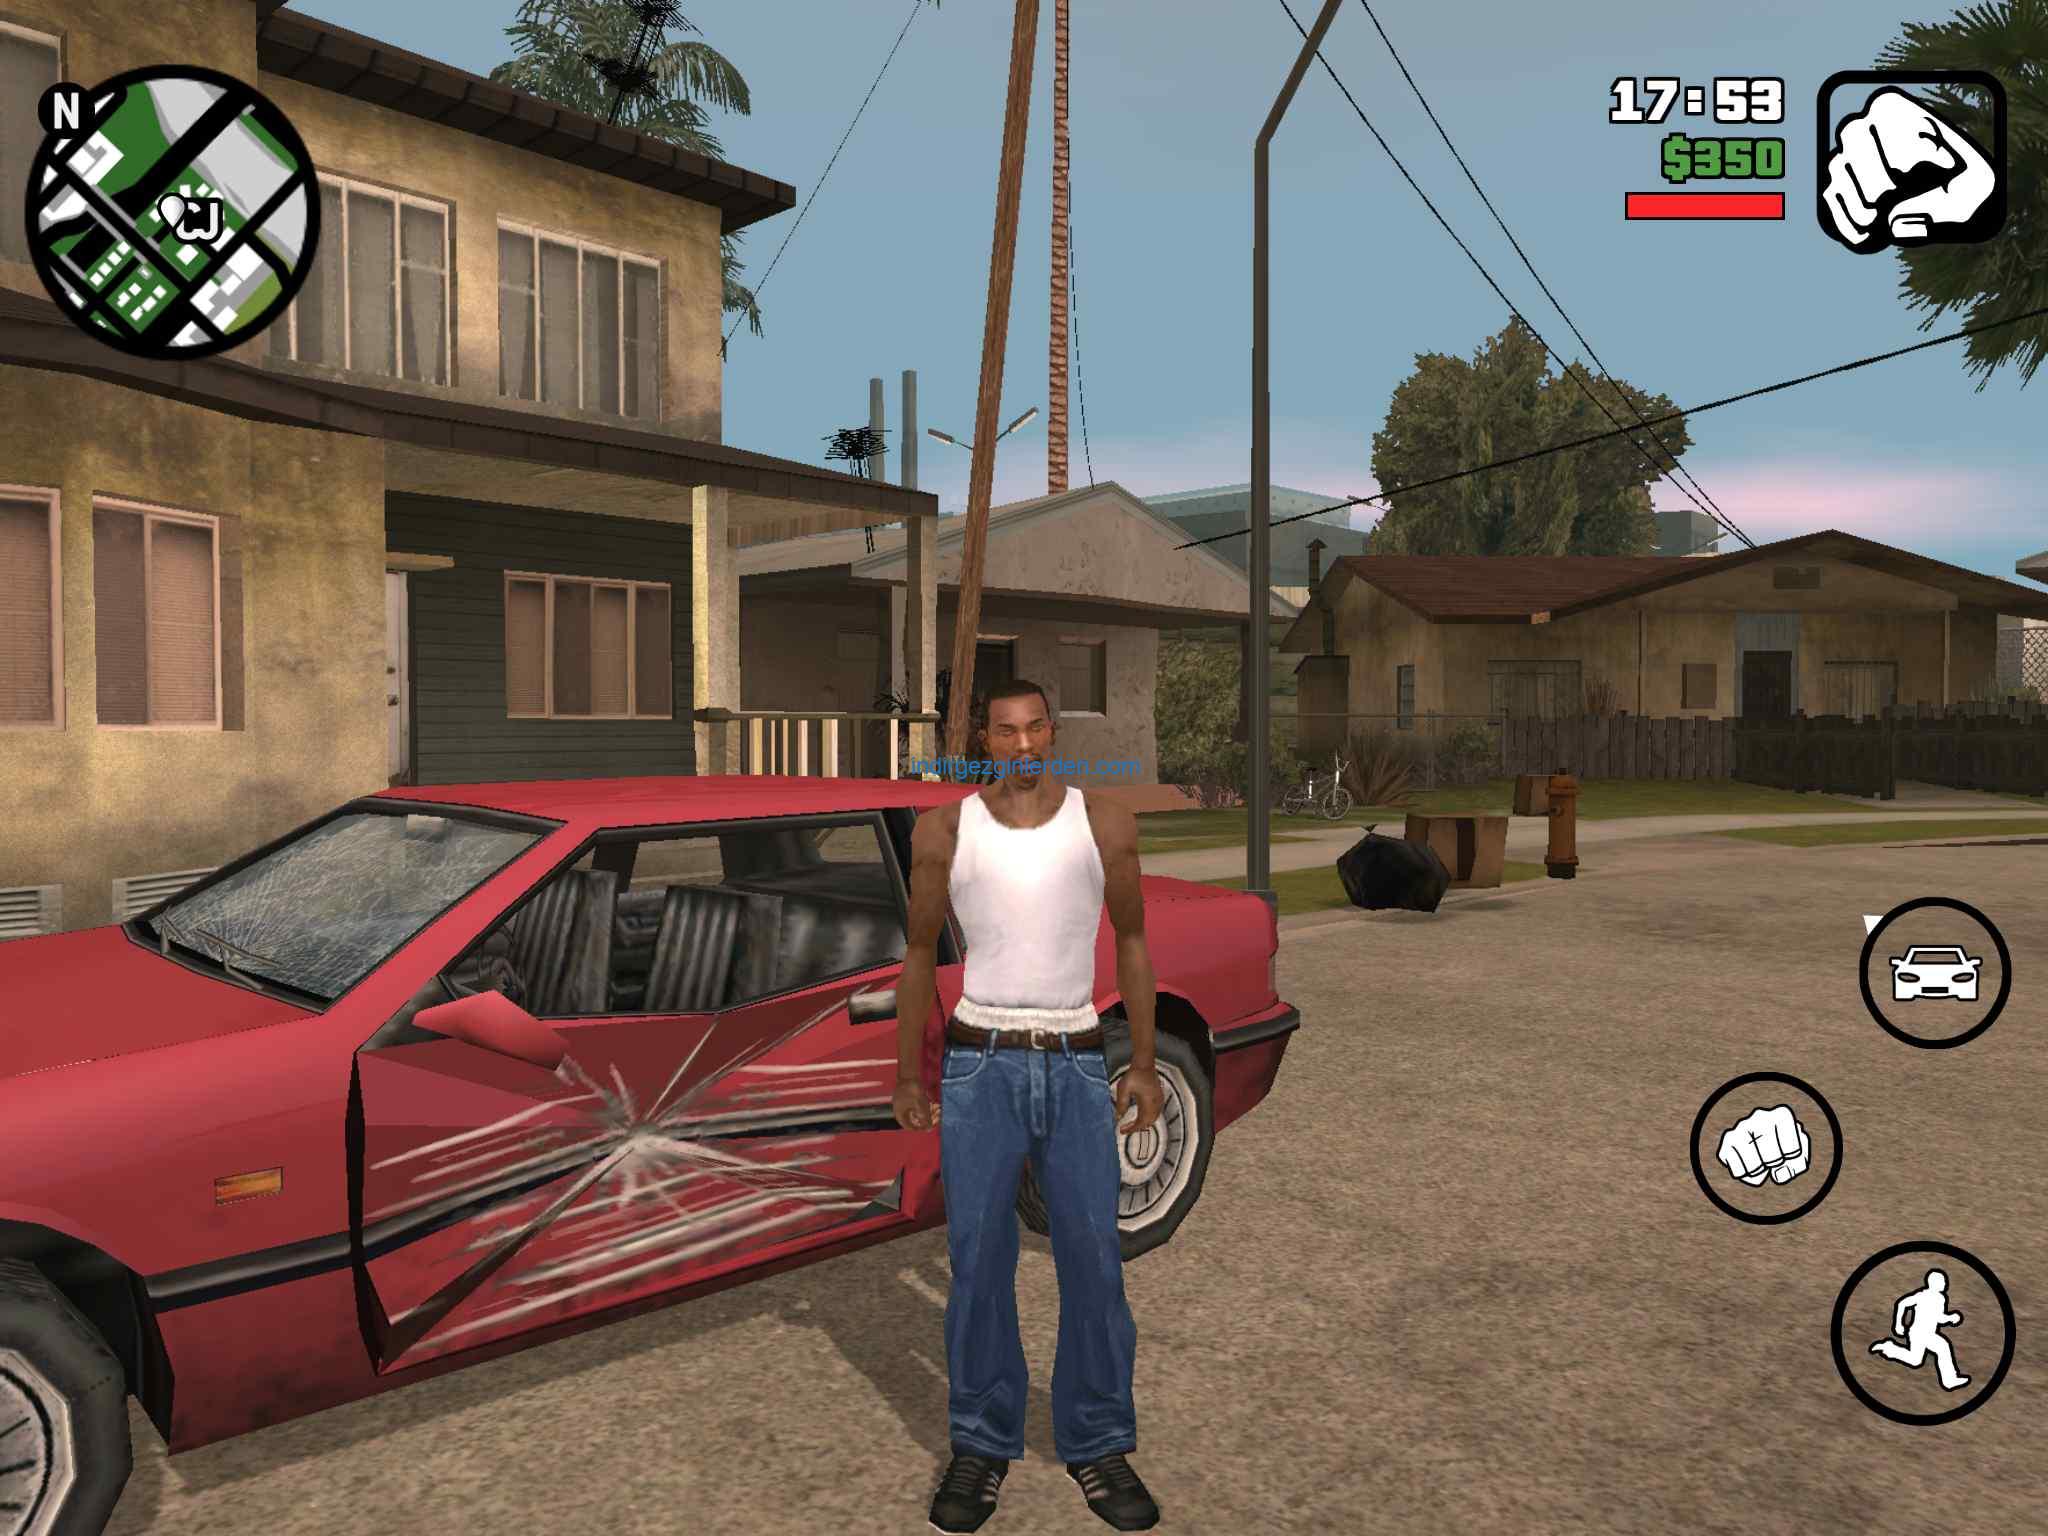 gta san andreas game free download for pc full version in utorrent